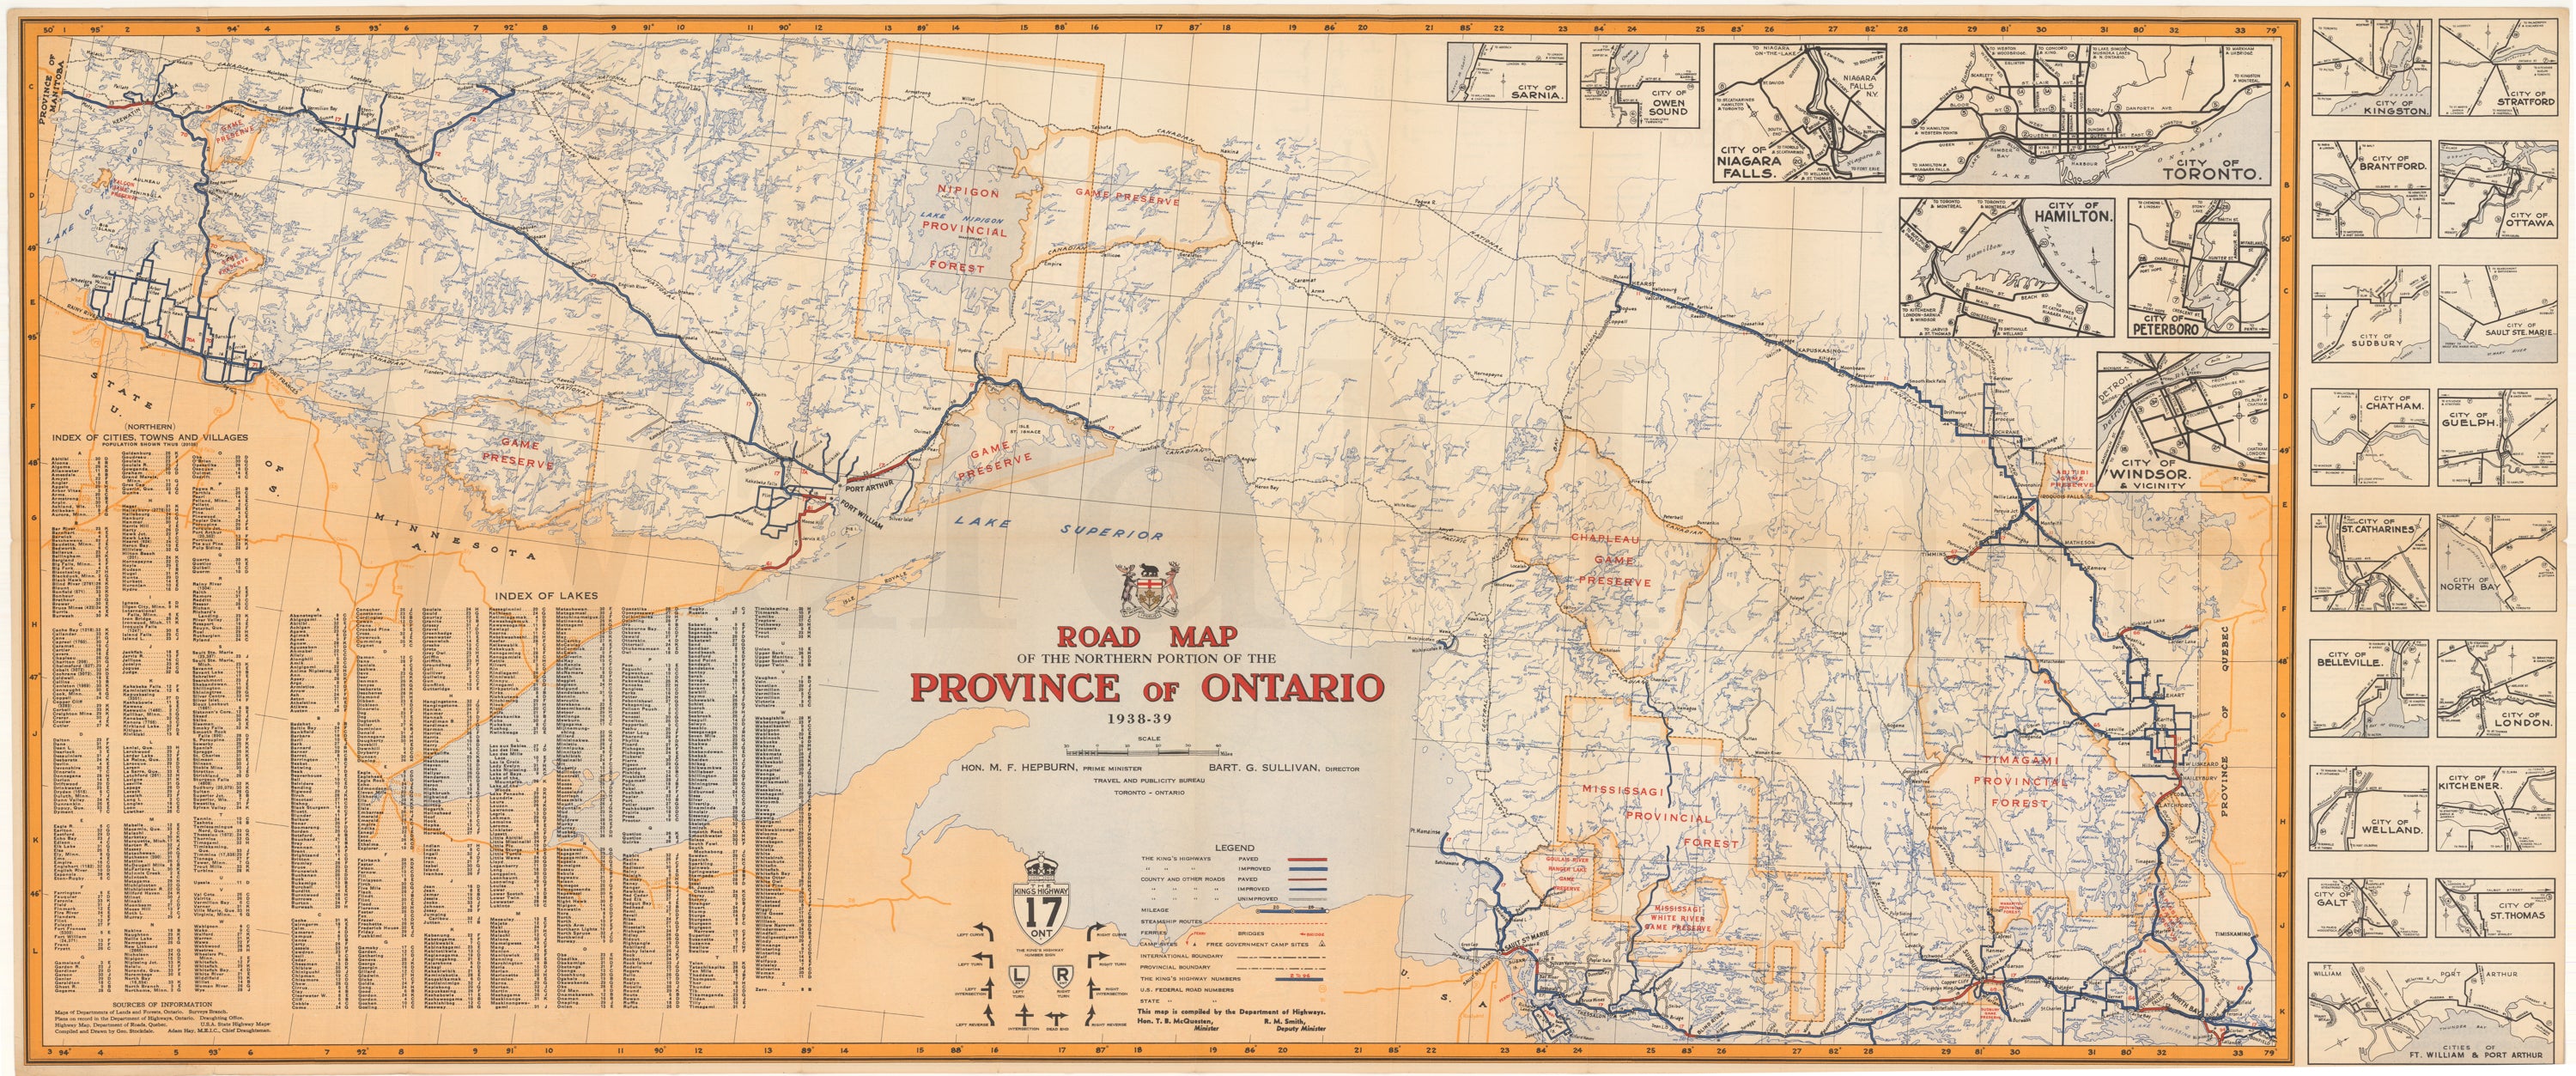 Ontario Road Map 1938-1939 (Northern Portion)